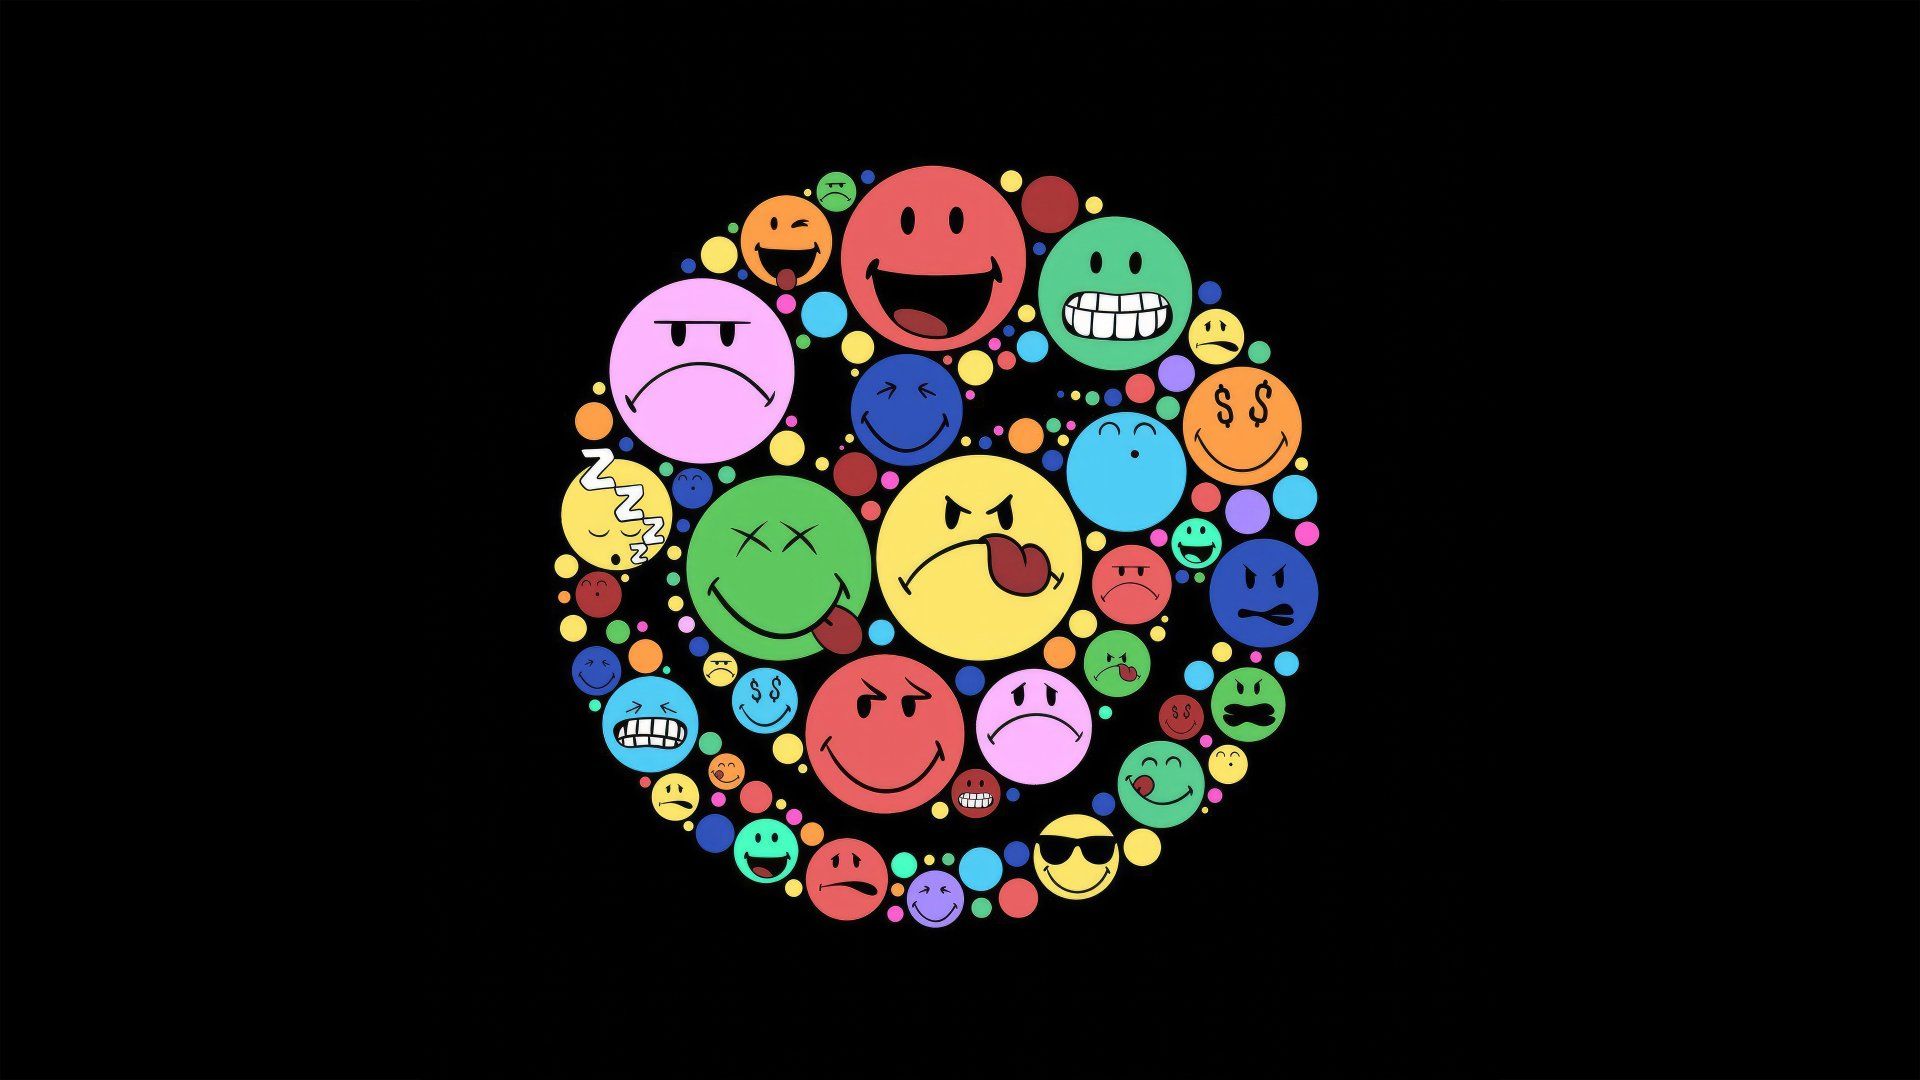 A collection of different colored smiley faces - Smiley